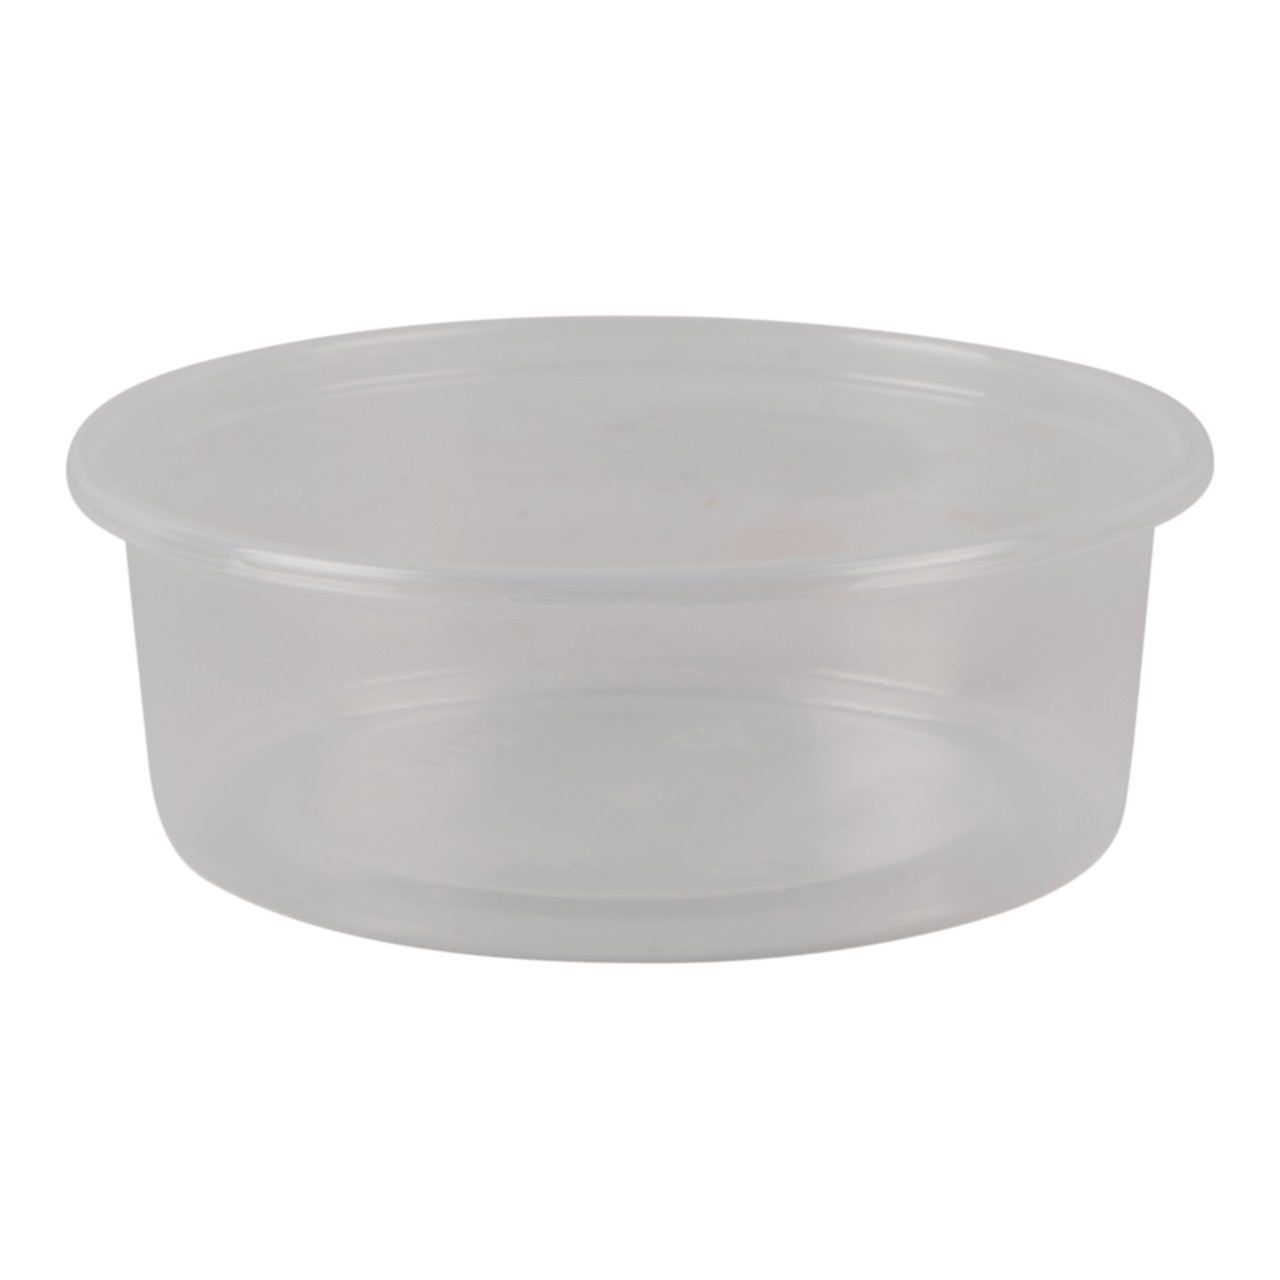 Cup rond 101 mm 150ml plastic transparant